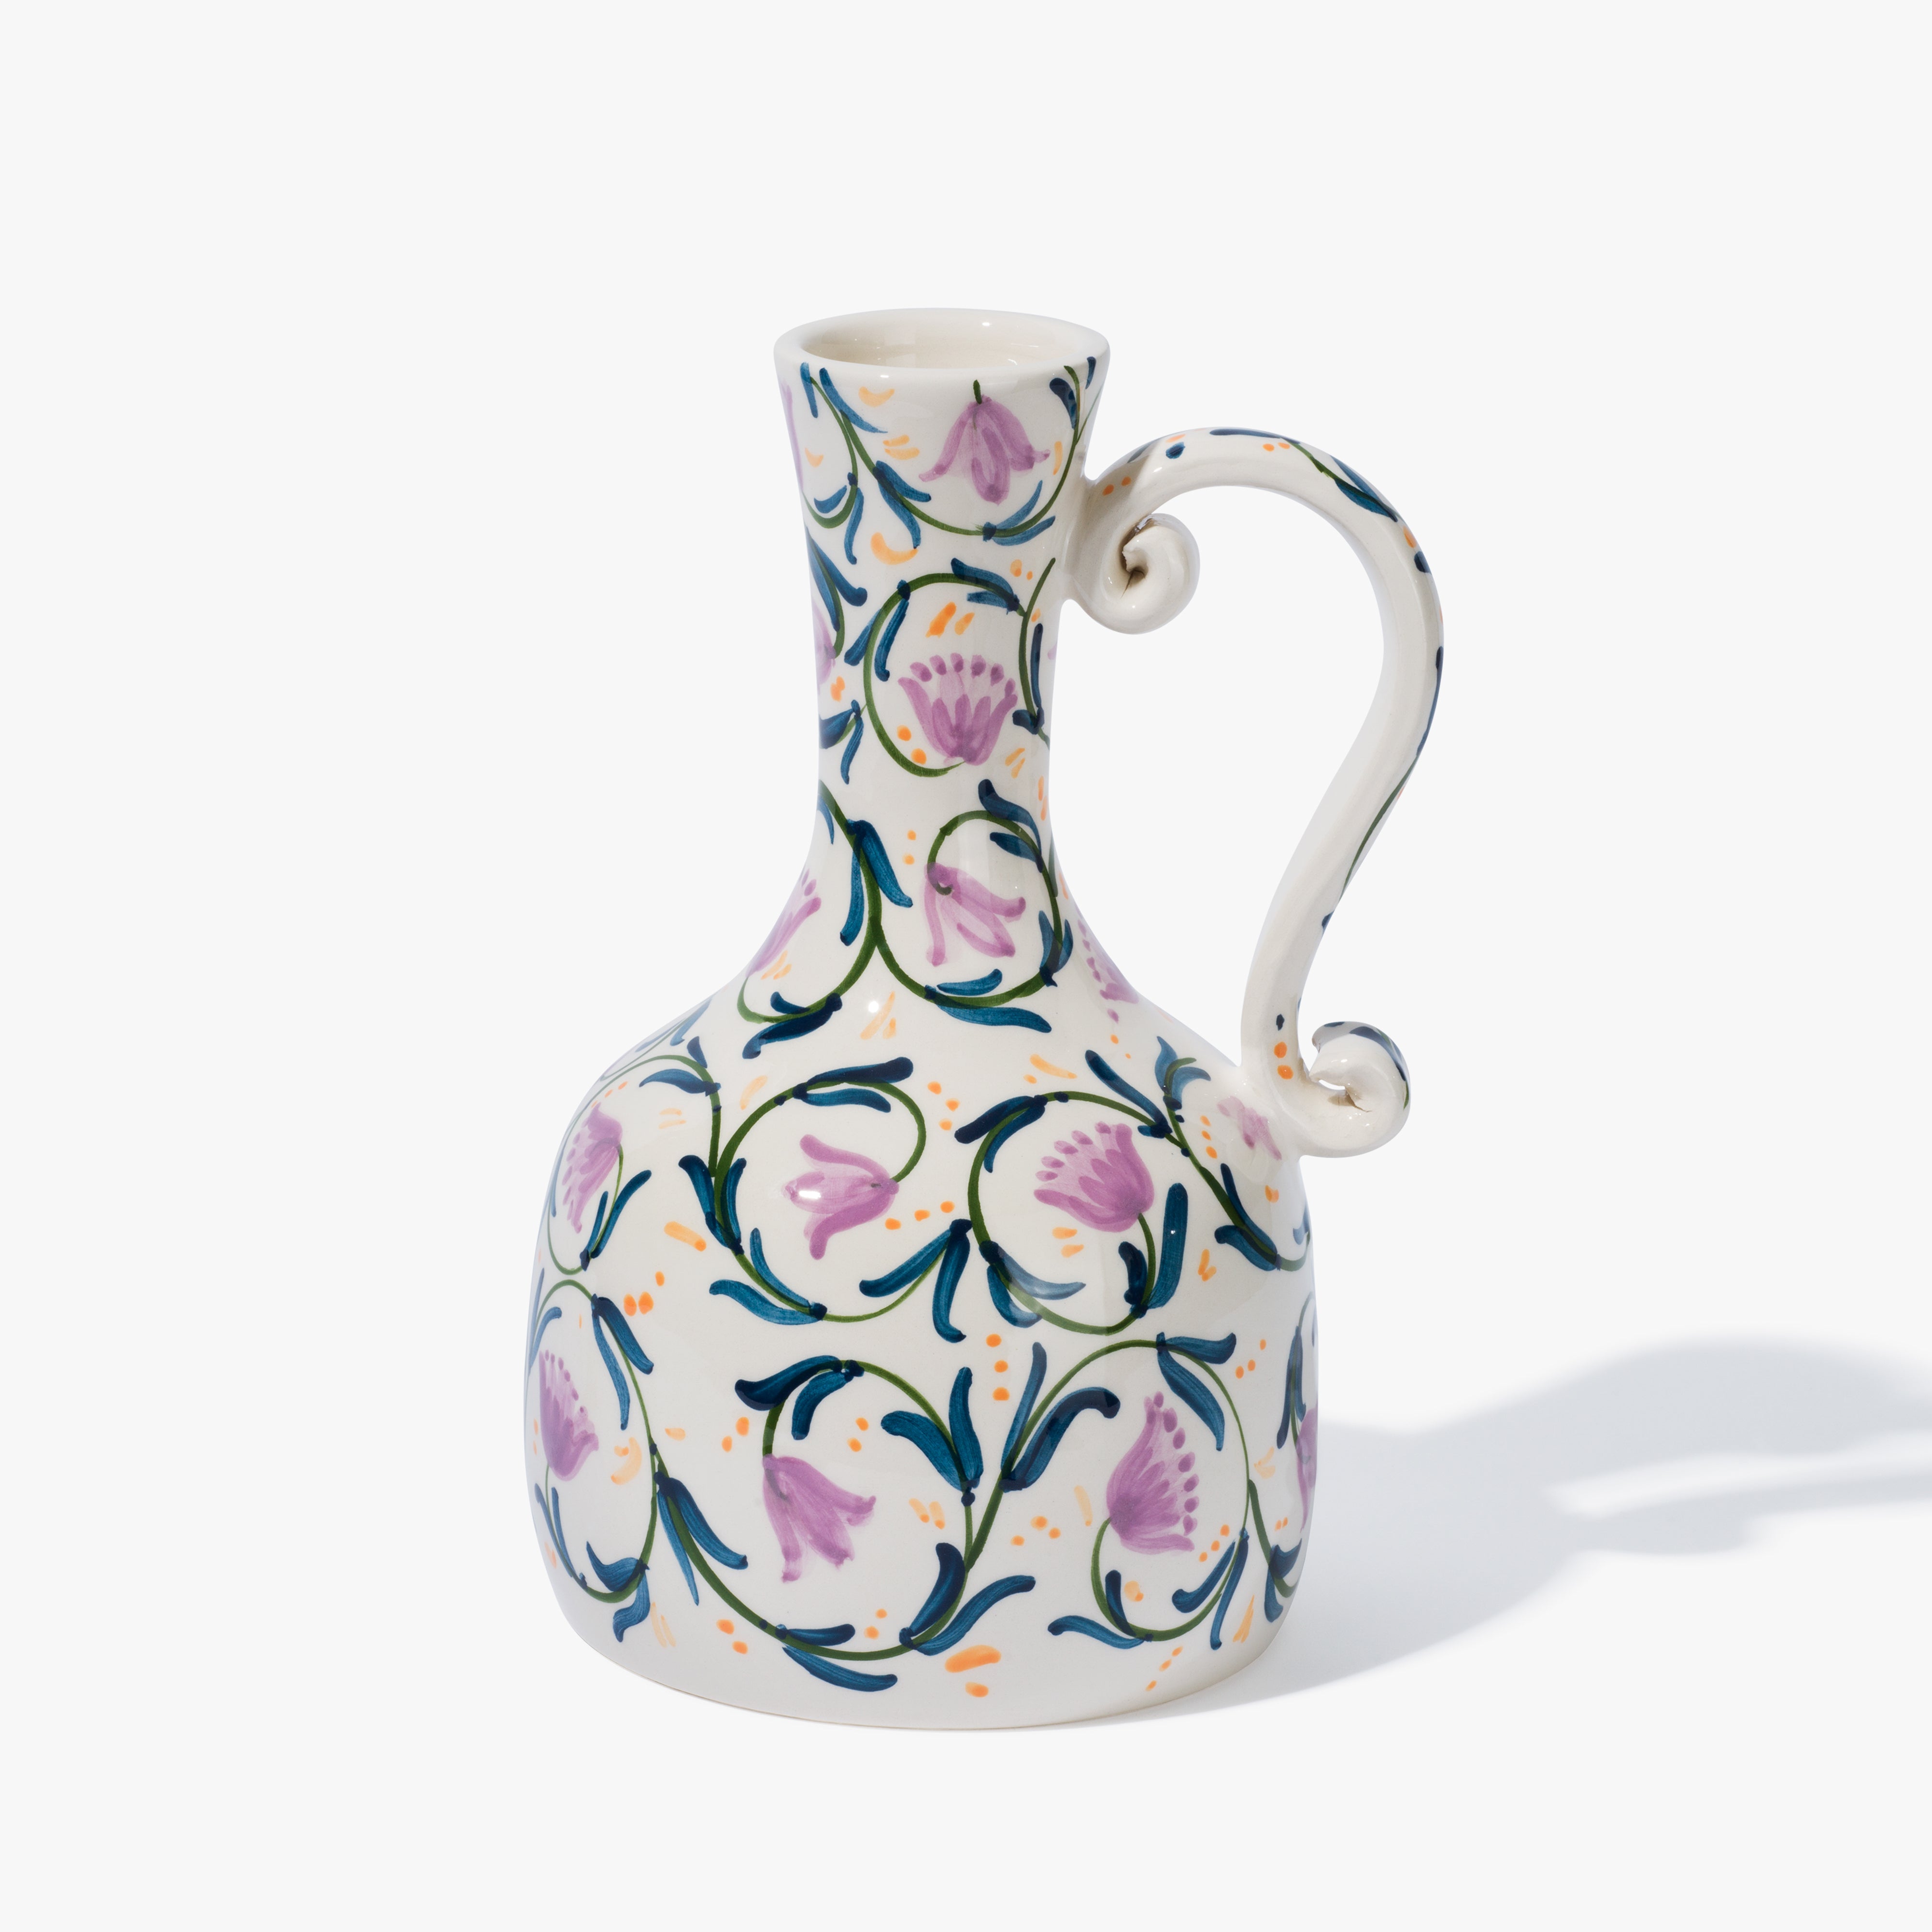 An ornate ceramic Vaisselle vase with a handle that has a lilac, lavender and green floral pattern covering it. 